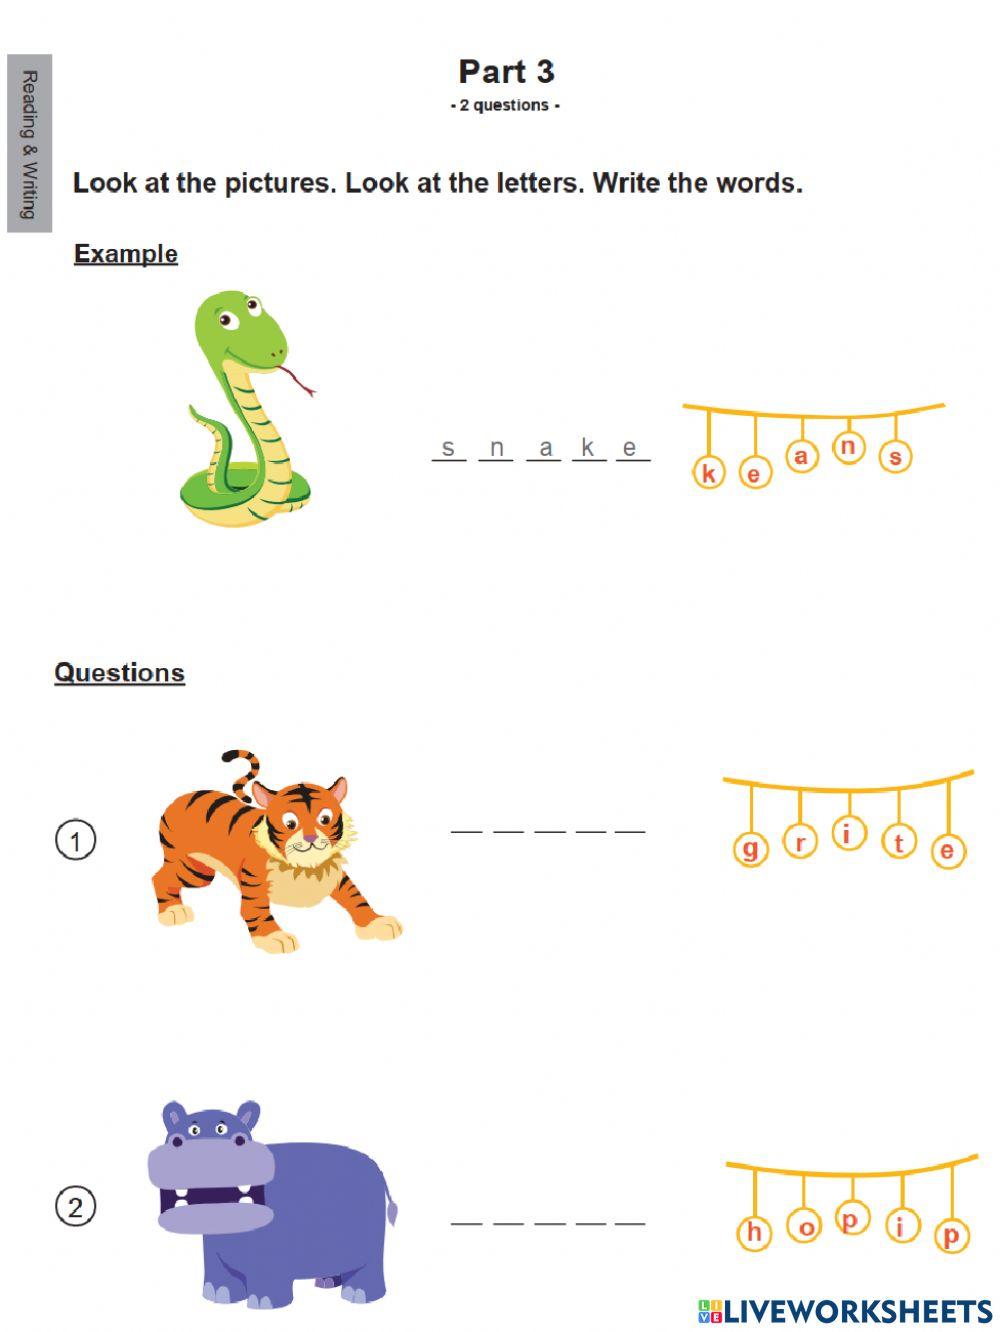 Reading and writing test theme 7 level 2